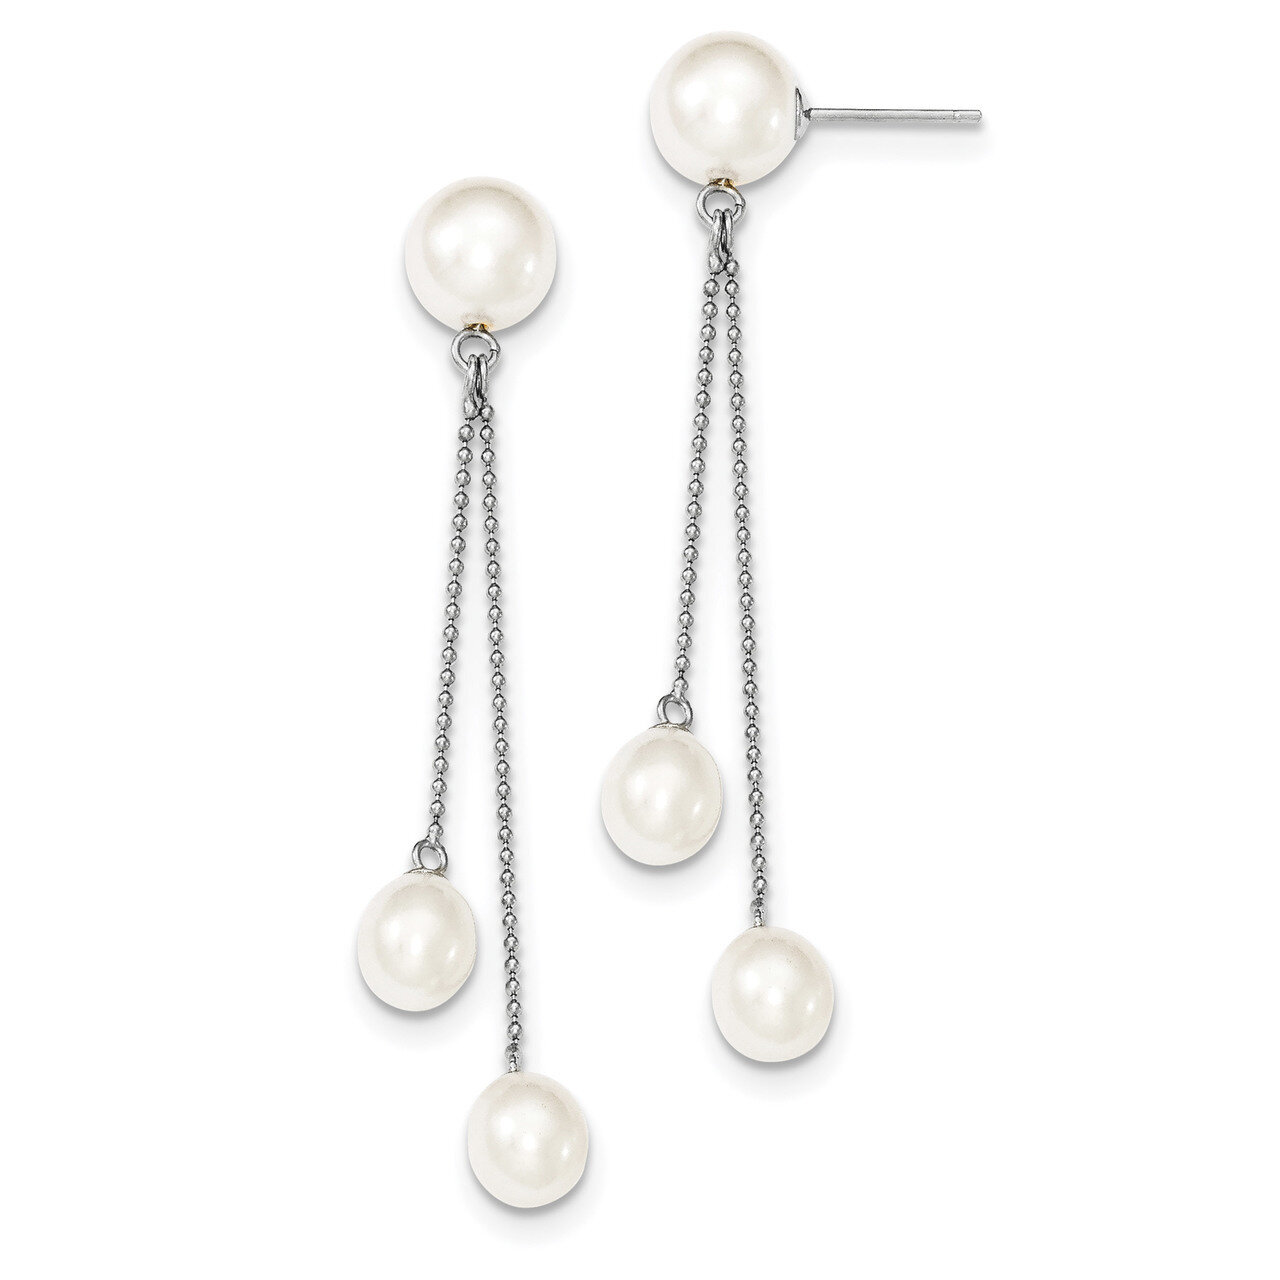 6-9mm White Cultured Freshwater 3-Pearl Post Dangle Earrings Sterling Silver Rhodium-plated QE12779